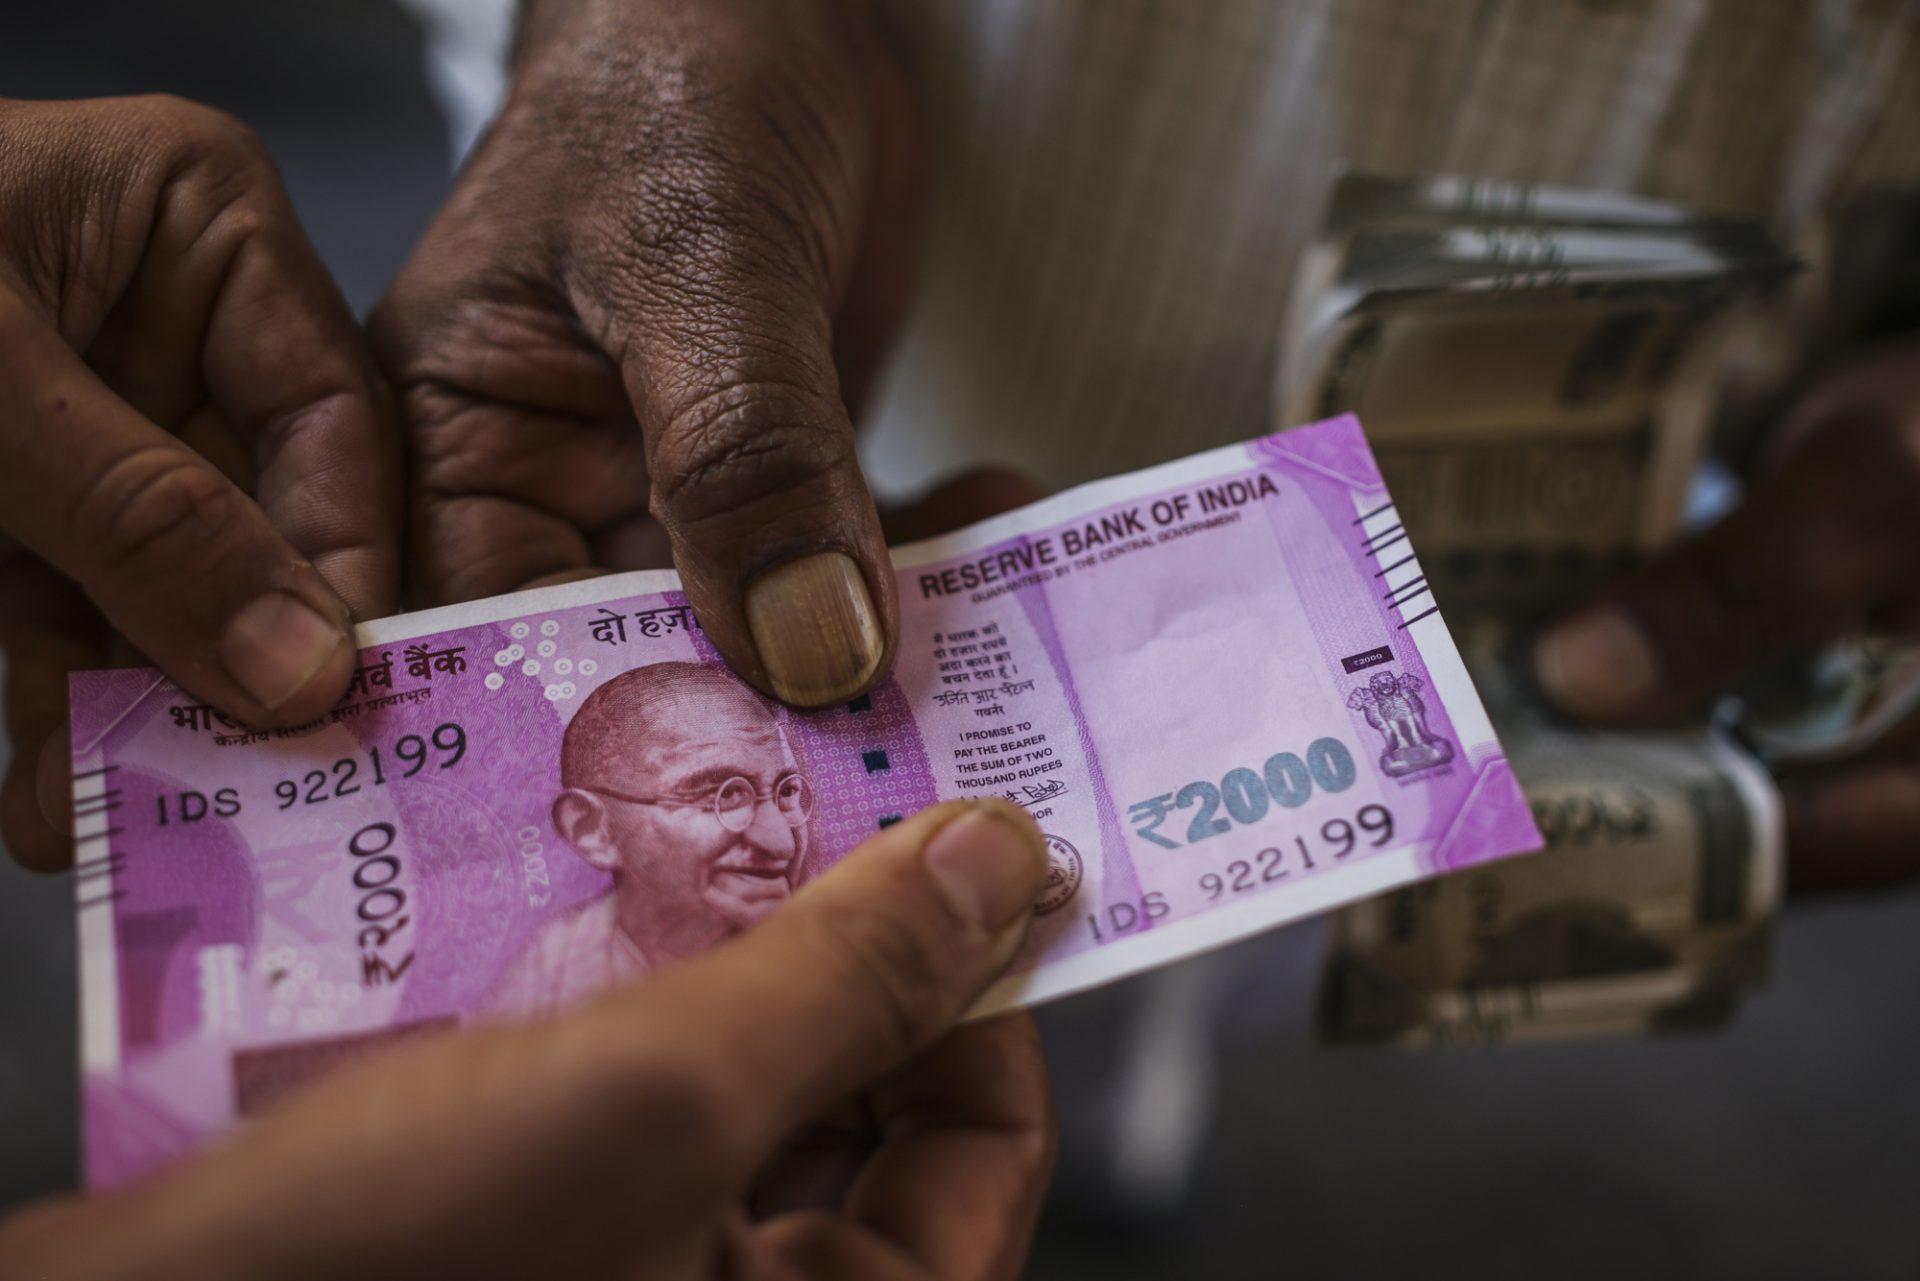 Surge in Deposits and Advances for Scheduled Banks to over ₹2-Lakh Cr each in December 1 Fortnight